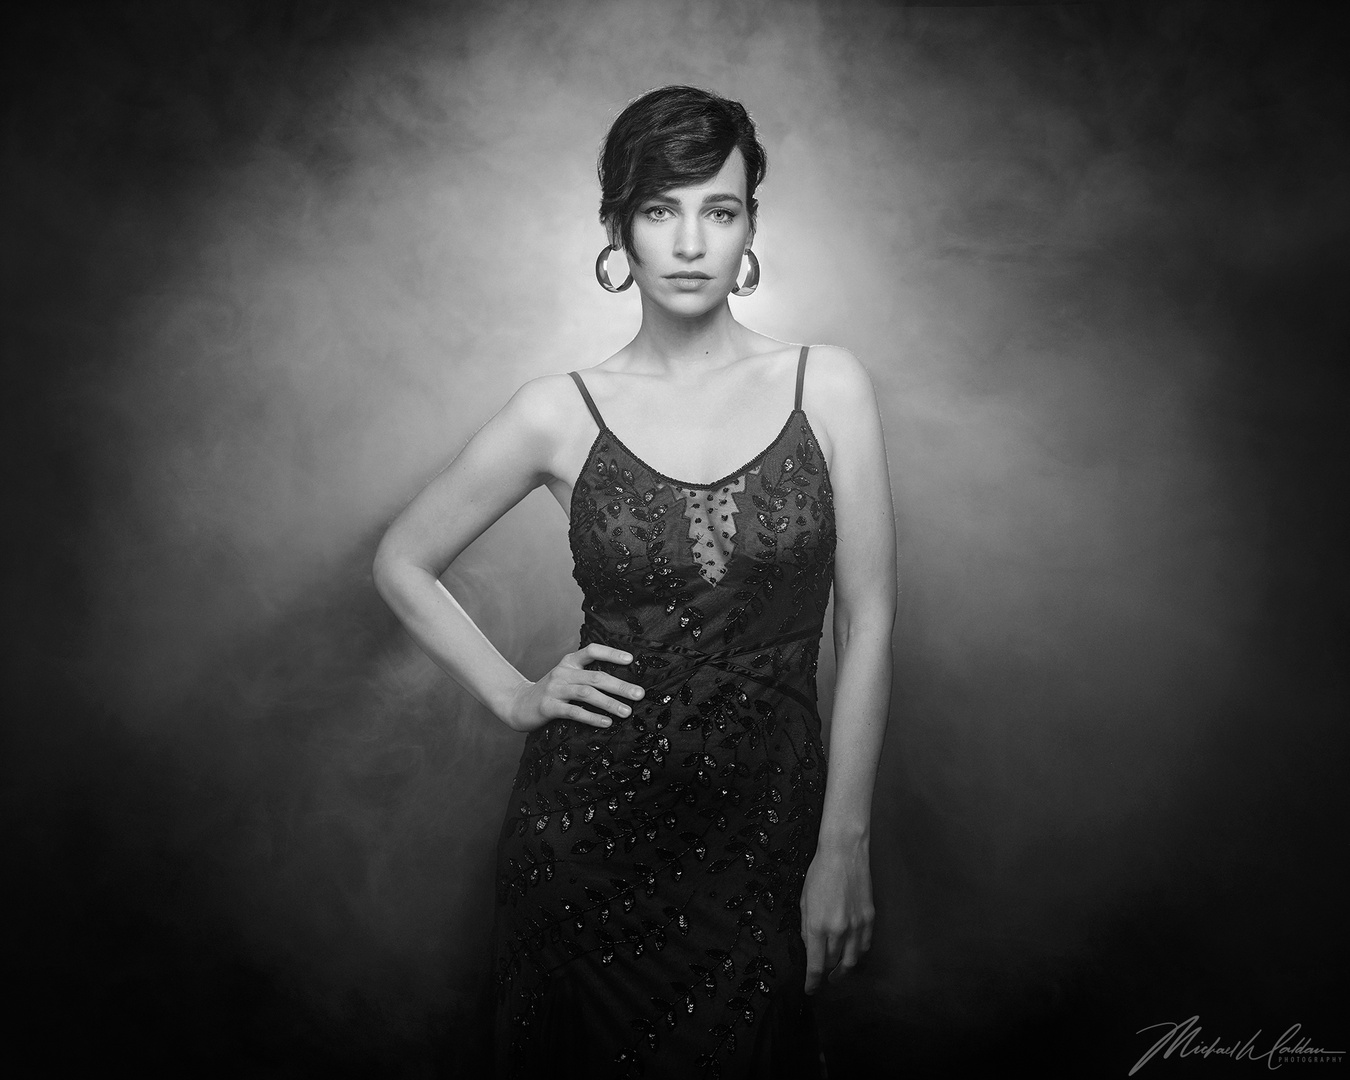 Old Hollywood Glamour Portrait